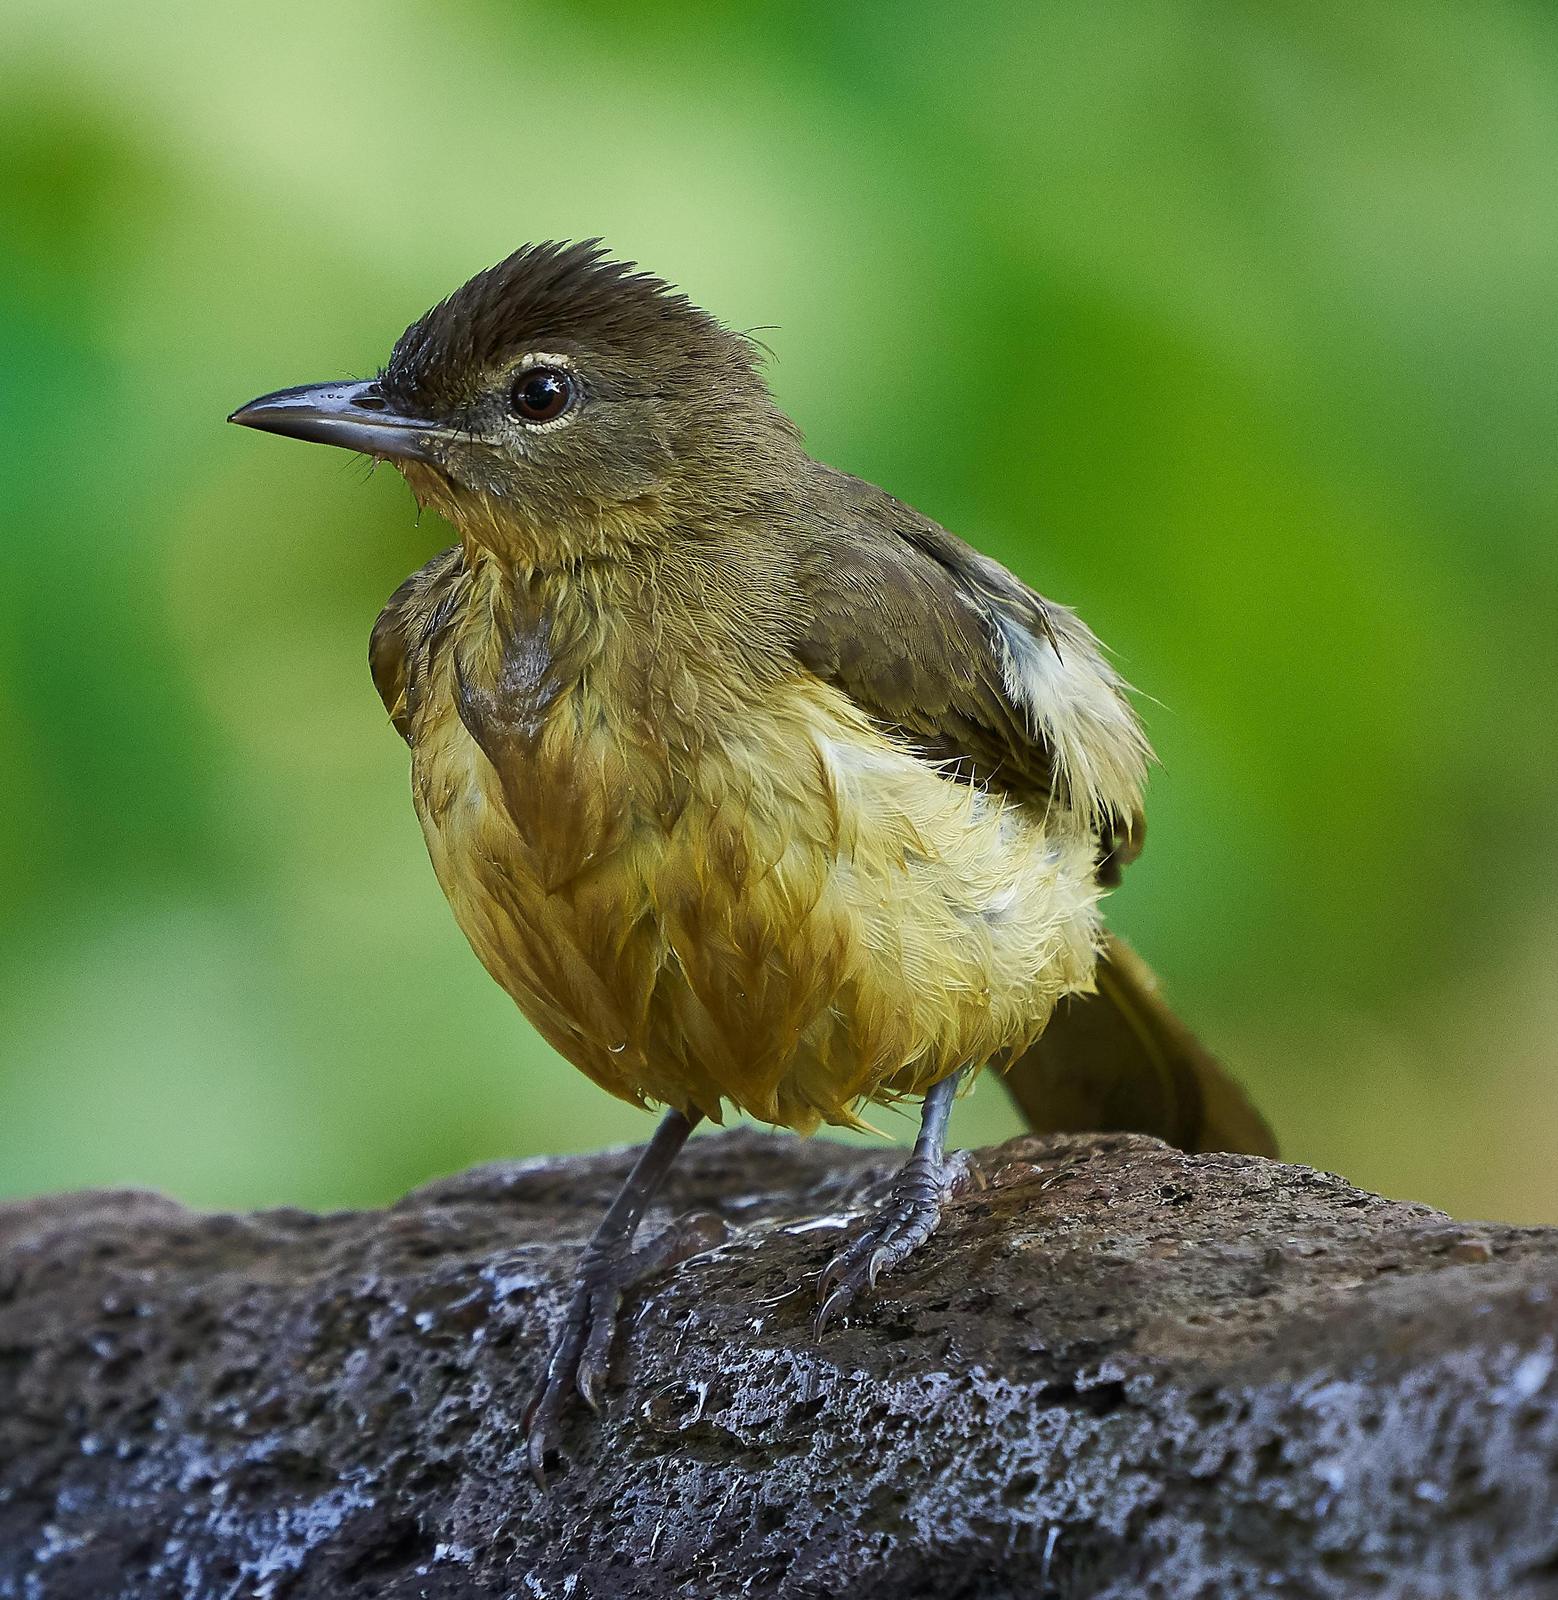 Yellow-bellied Greenbul Photo by Steven Cheong